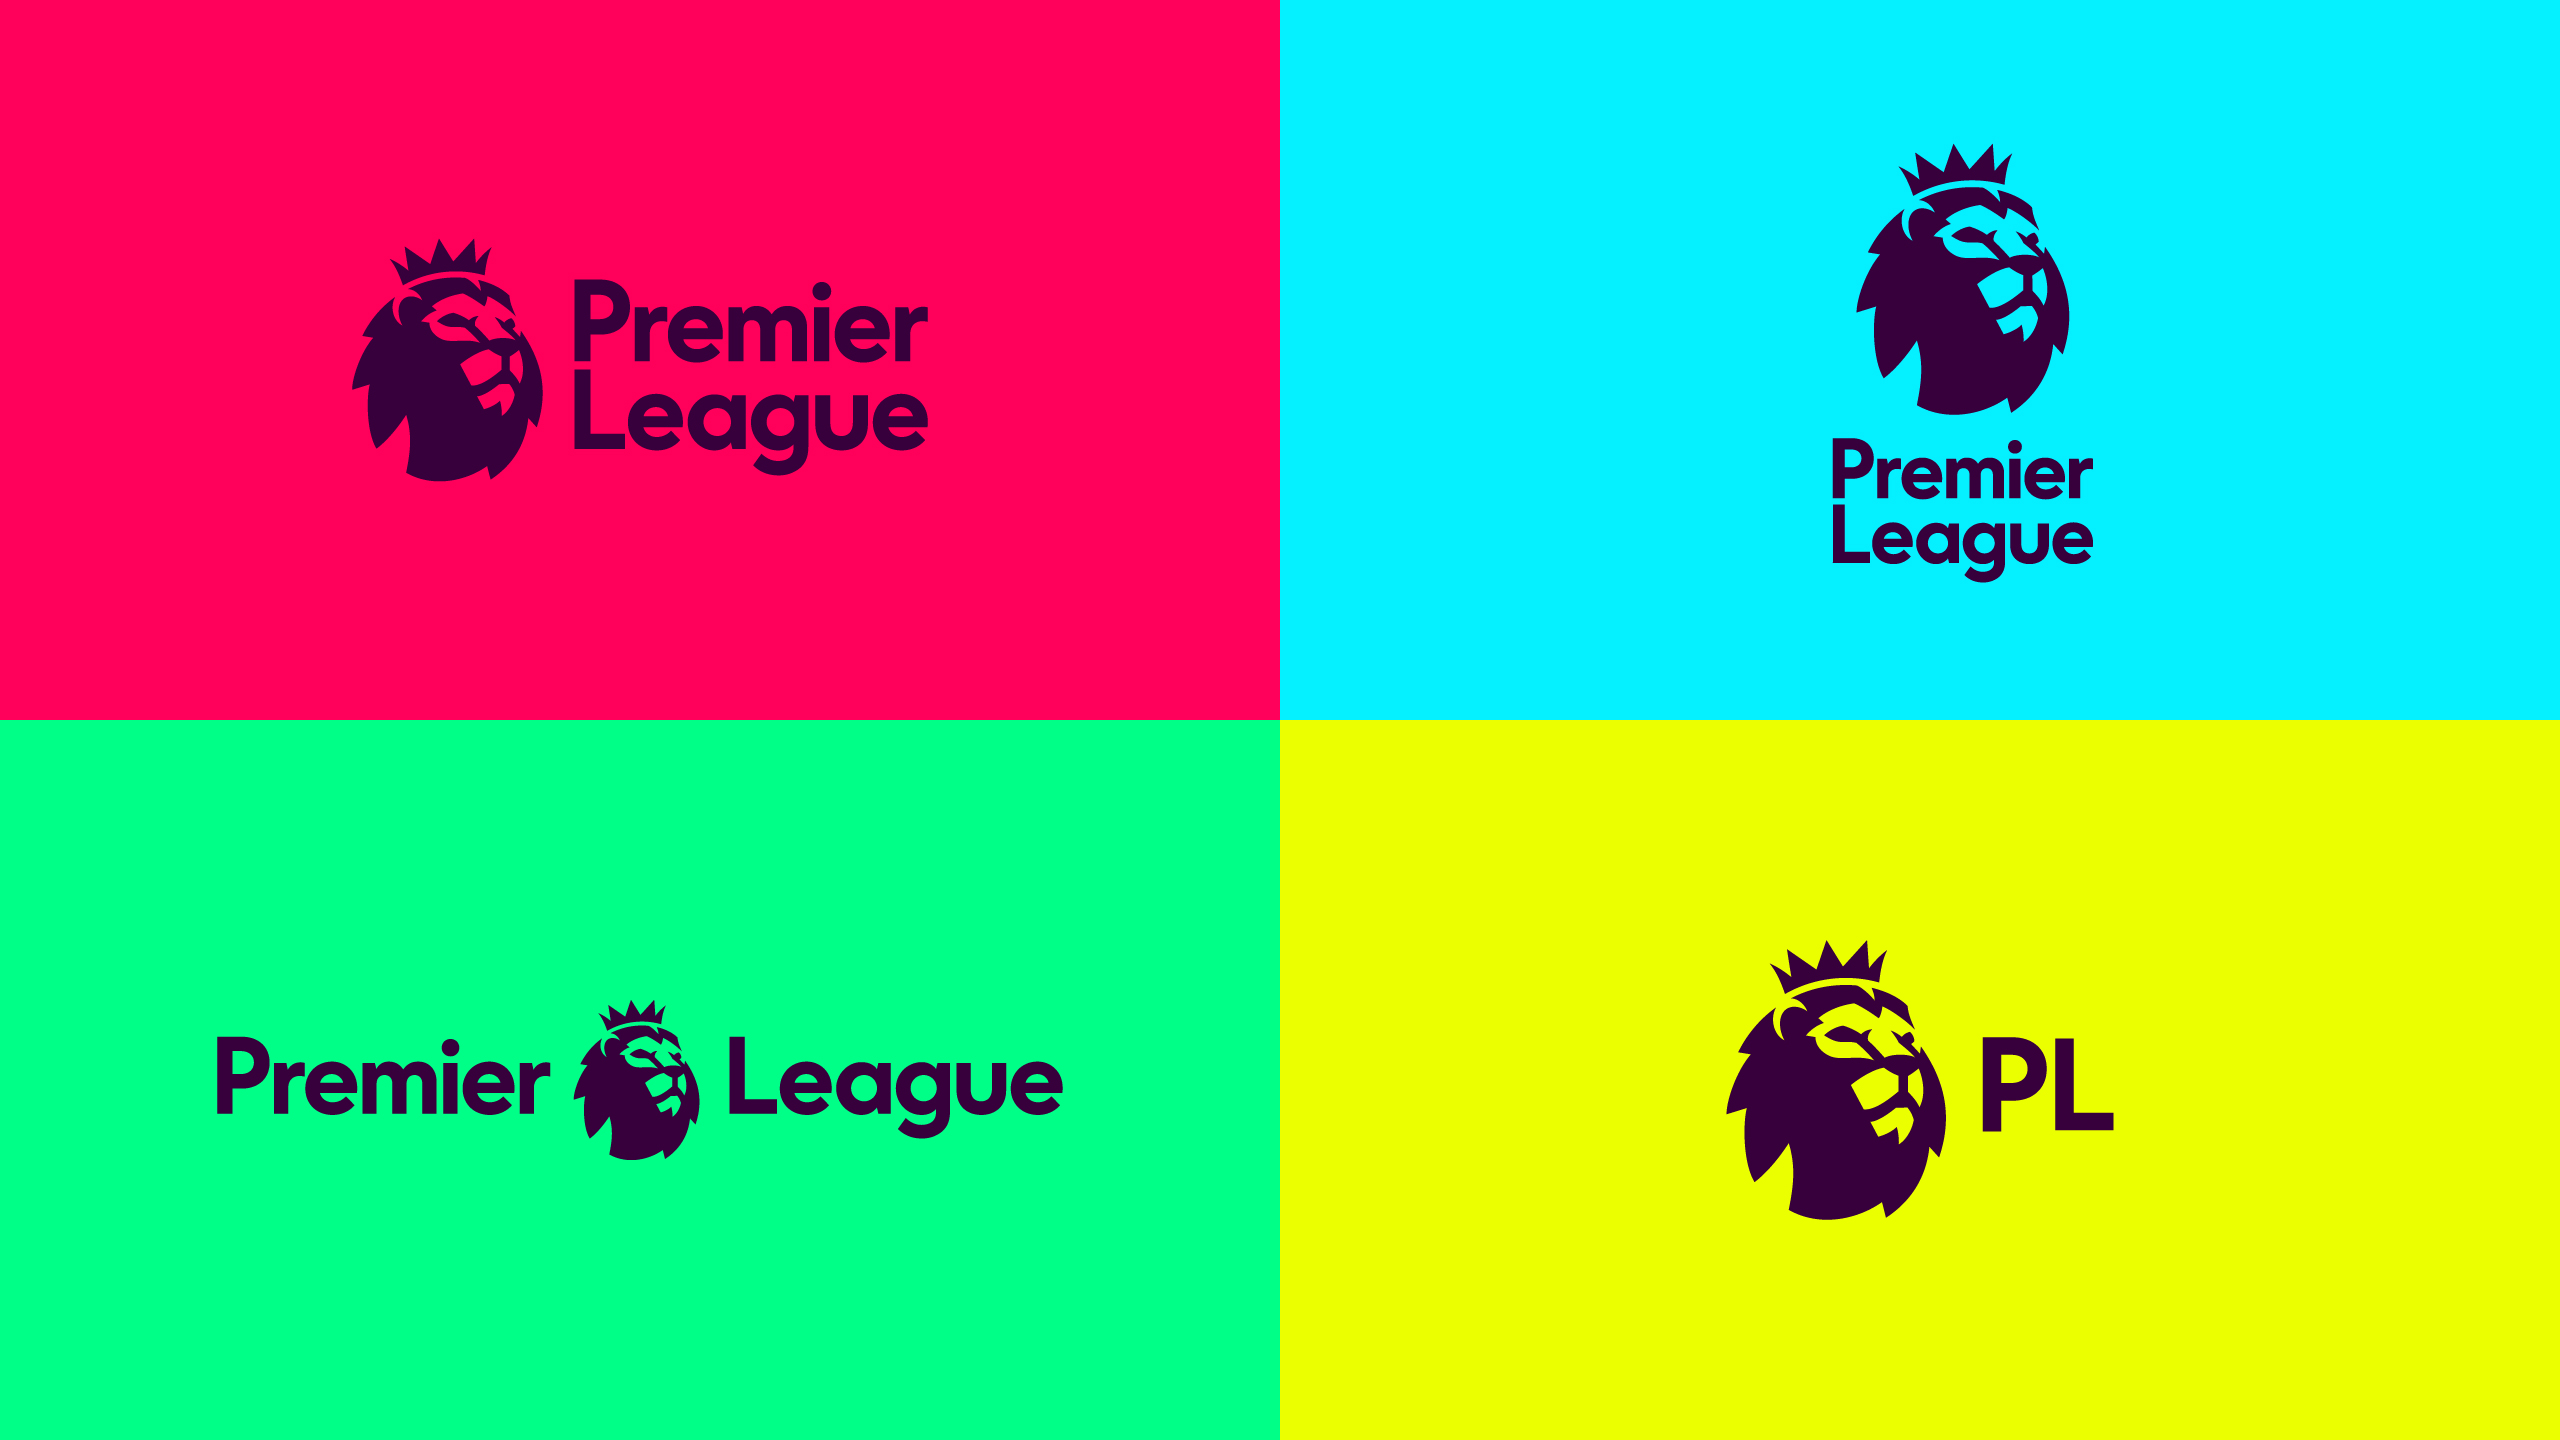 New visuals of the Premier league rebrand